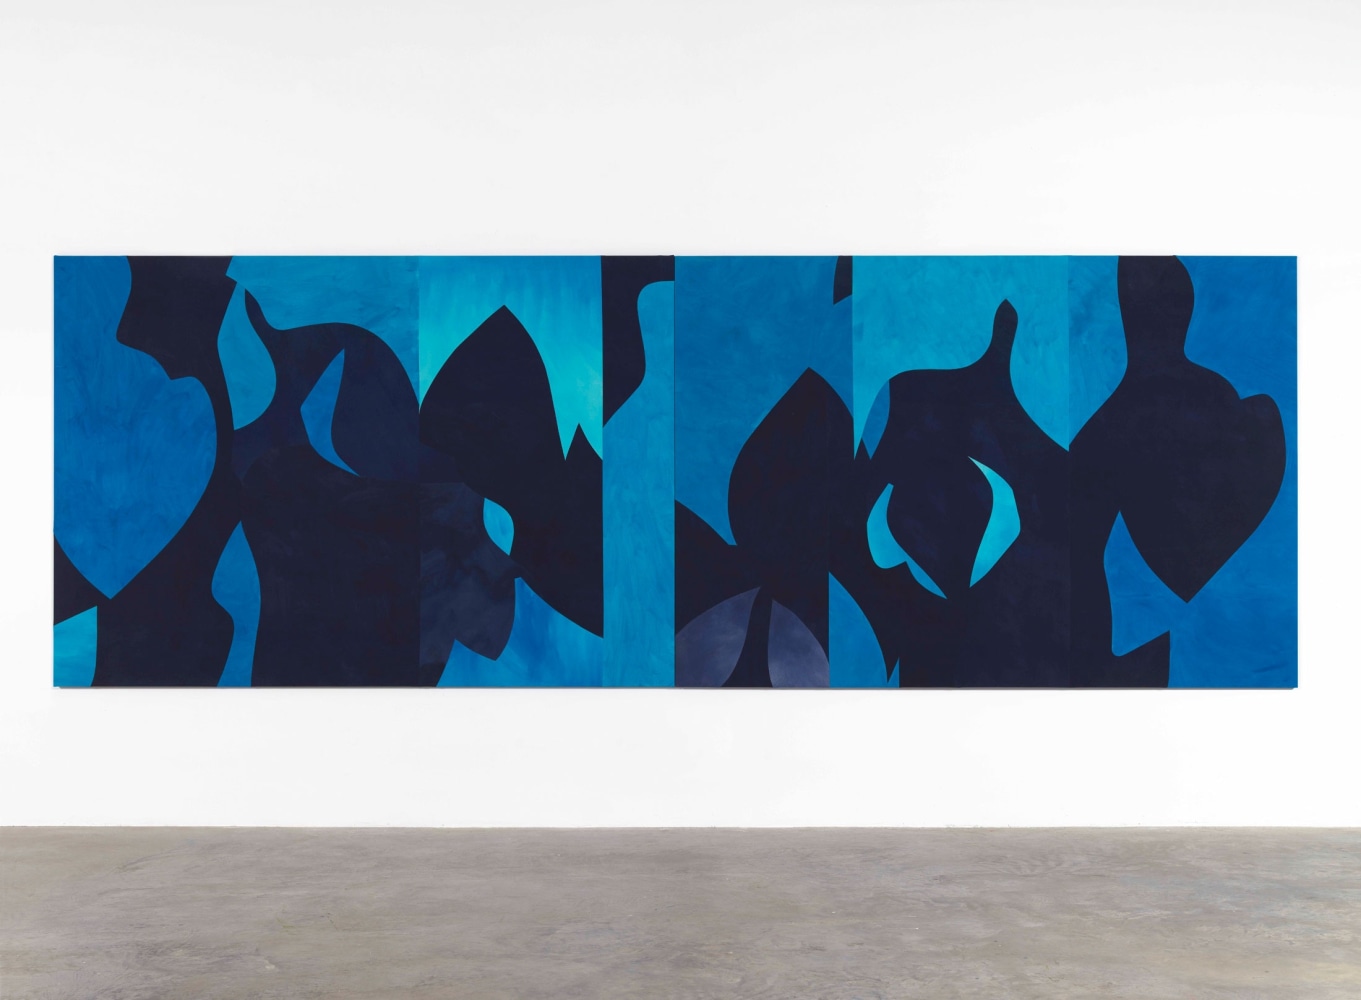 Sarah Crowner
Night Painting with Verticals, 2020
Acrylic on canvas, sewn
72 x 208 inches
(182.9 x 528.32 cm)